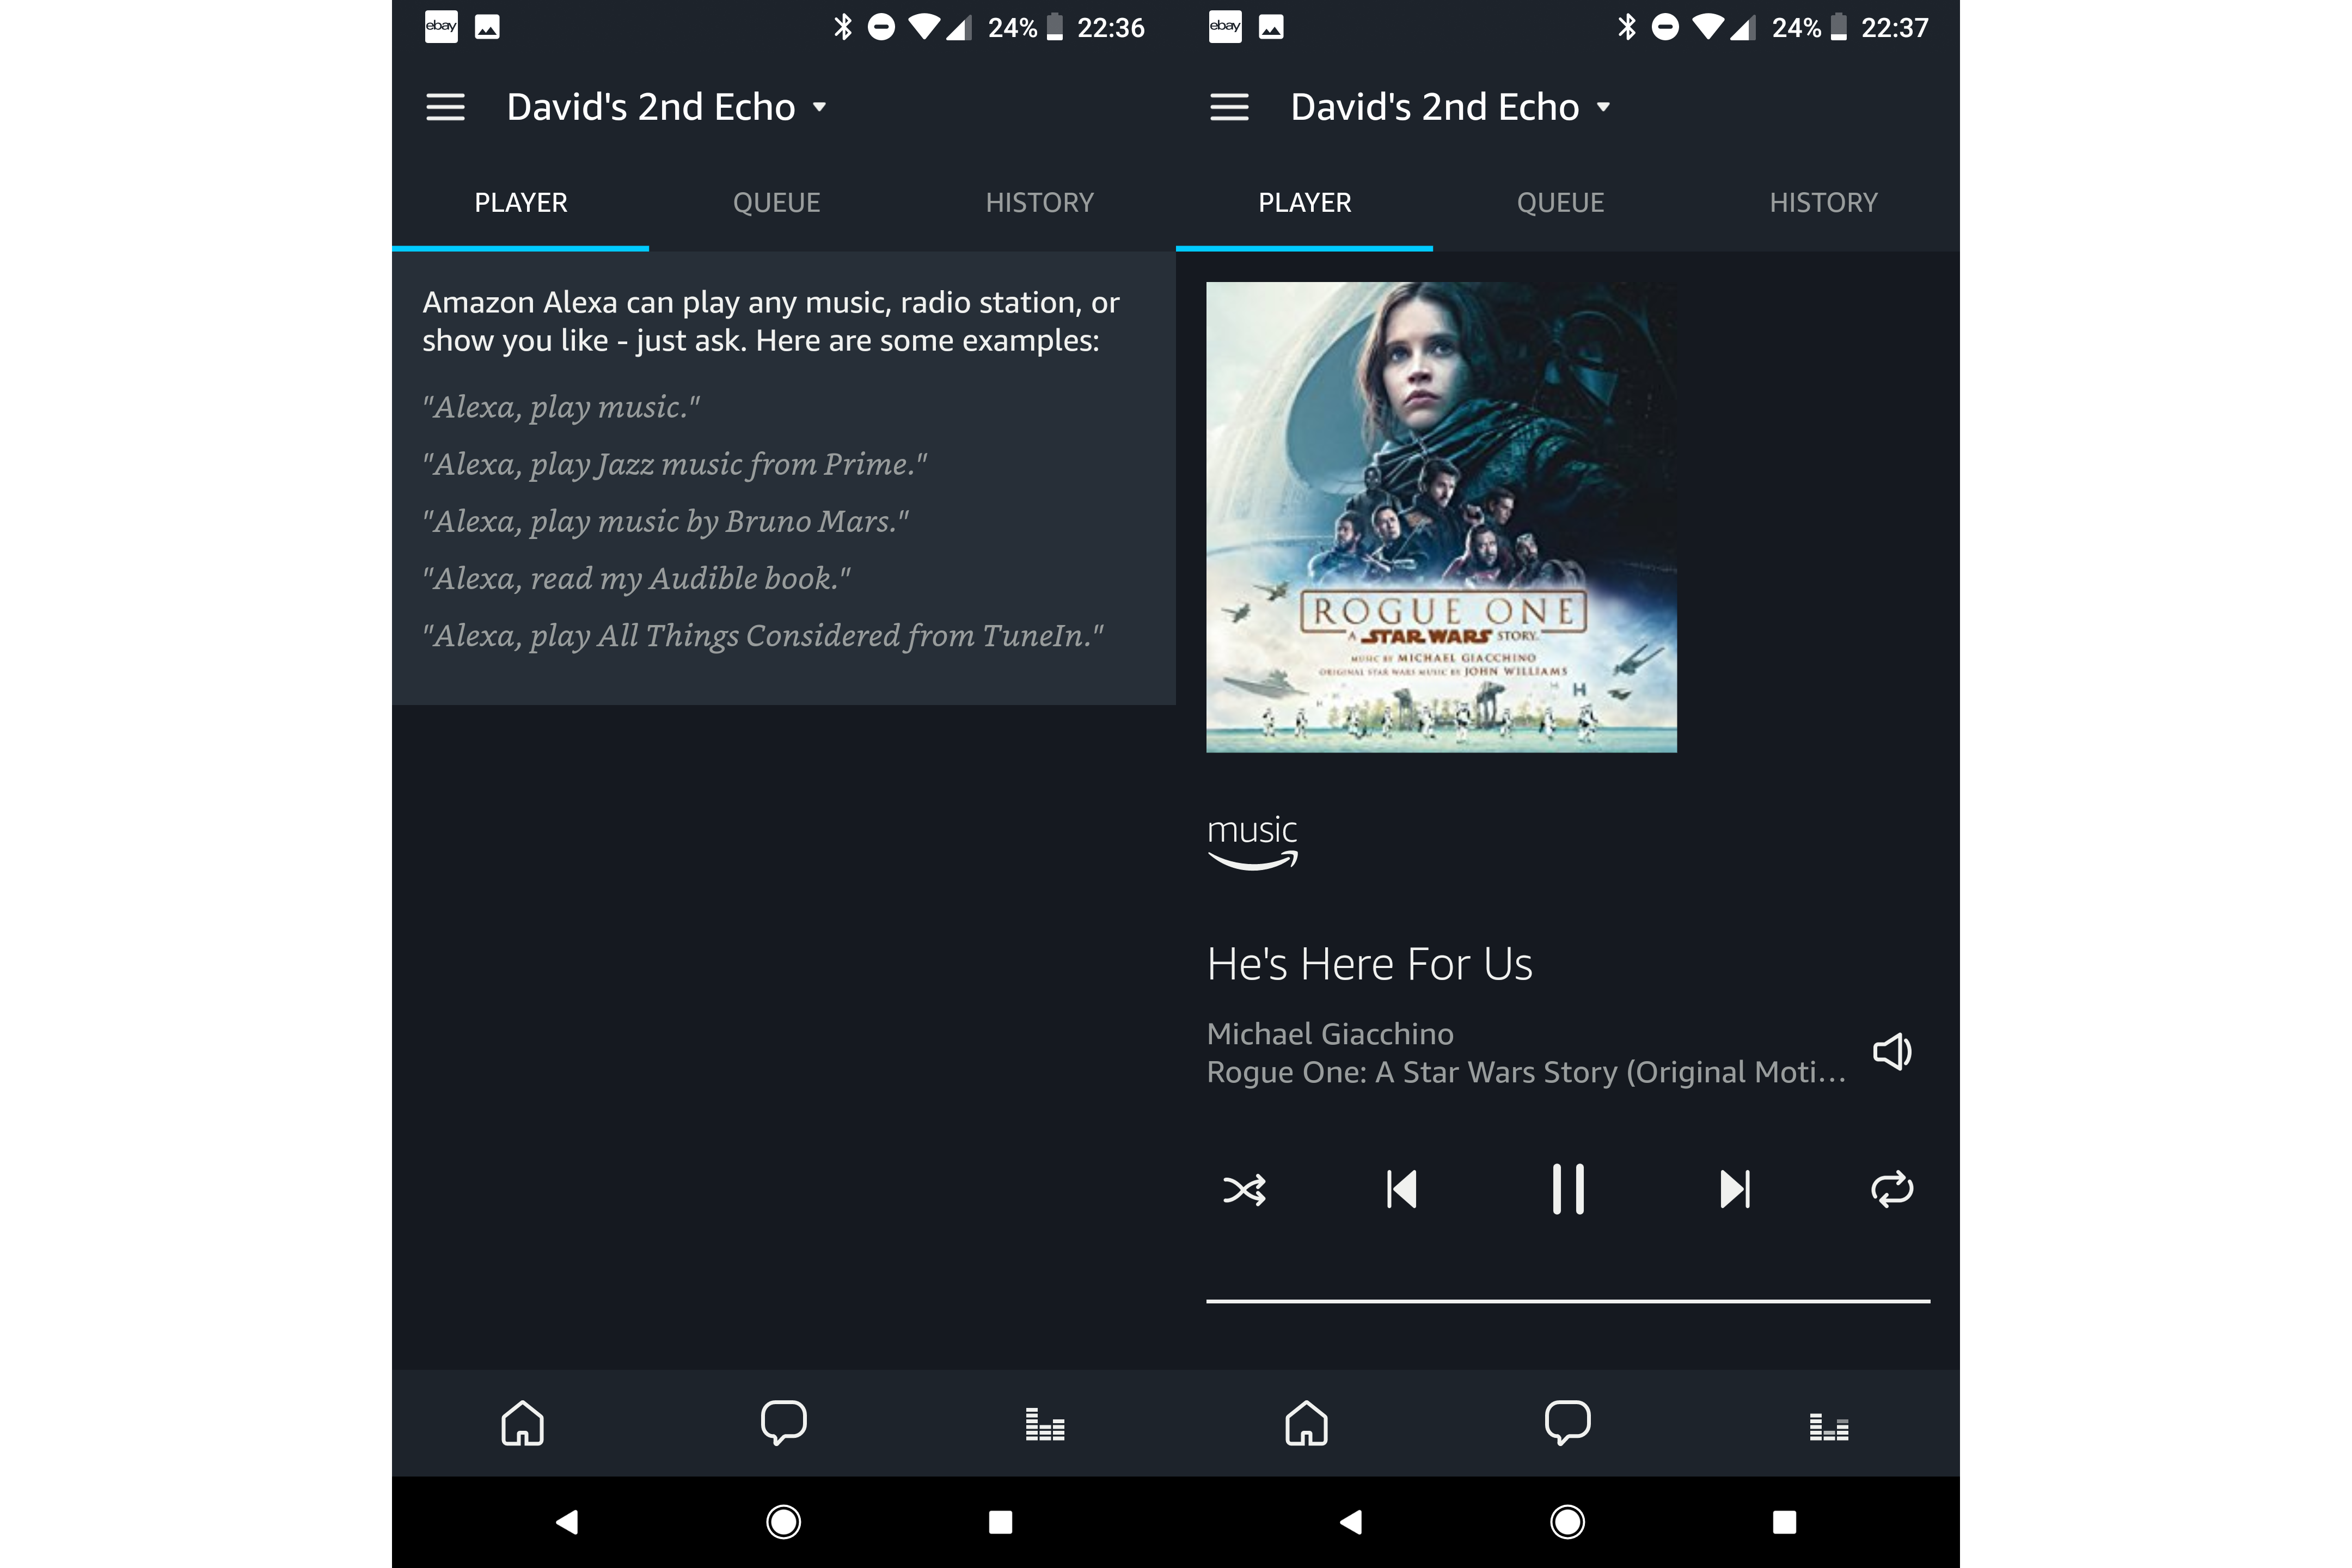 Screenshot of Amazon Echo music playback screen with Rogue One soundtrack.